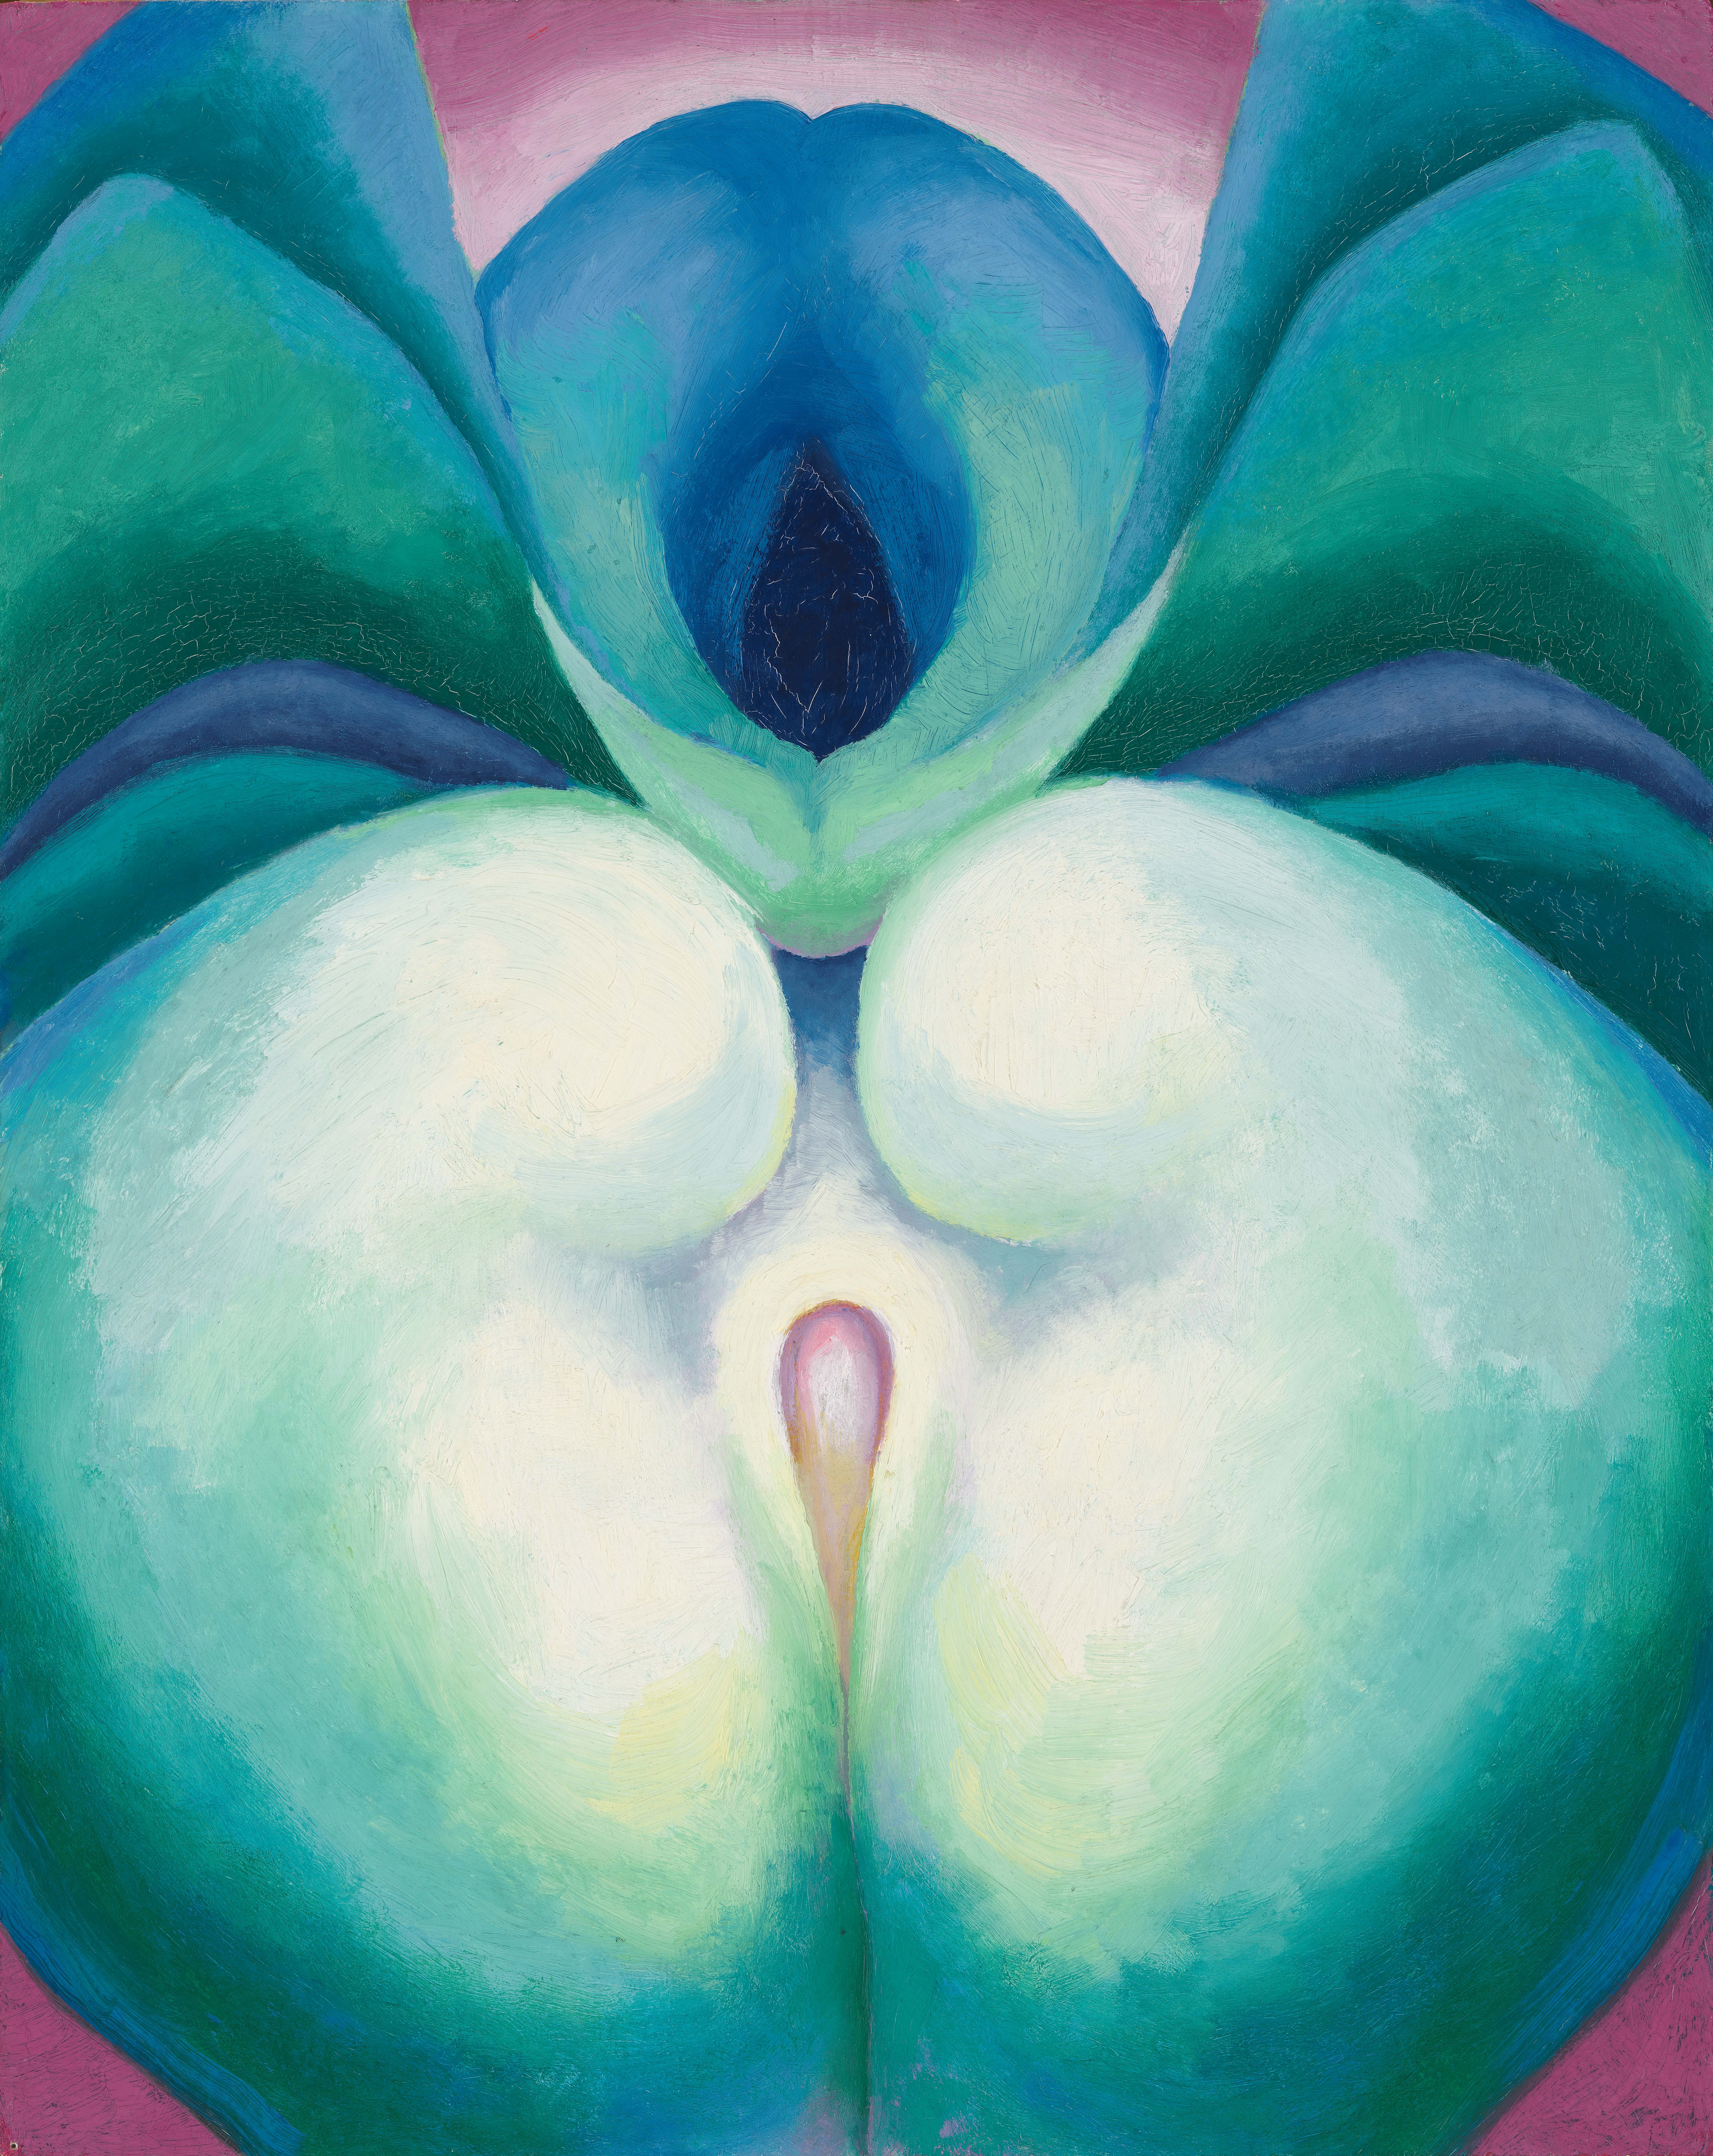 Oil painting composed of soft curvilinear forms of blue and green gradients organized along a vertical symmetrical axis that move from darker colors along the edges to clean off-whites in the center with a light pink ovular form perhaps representing a stamen